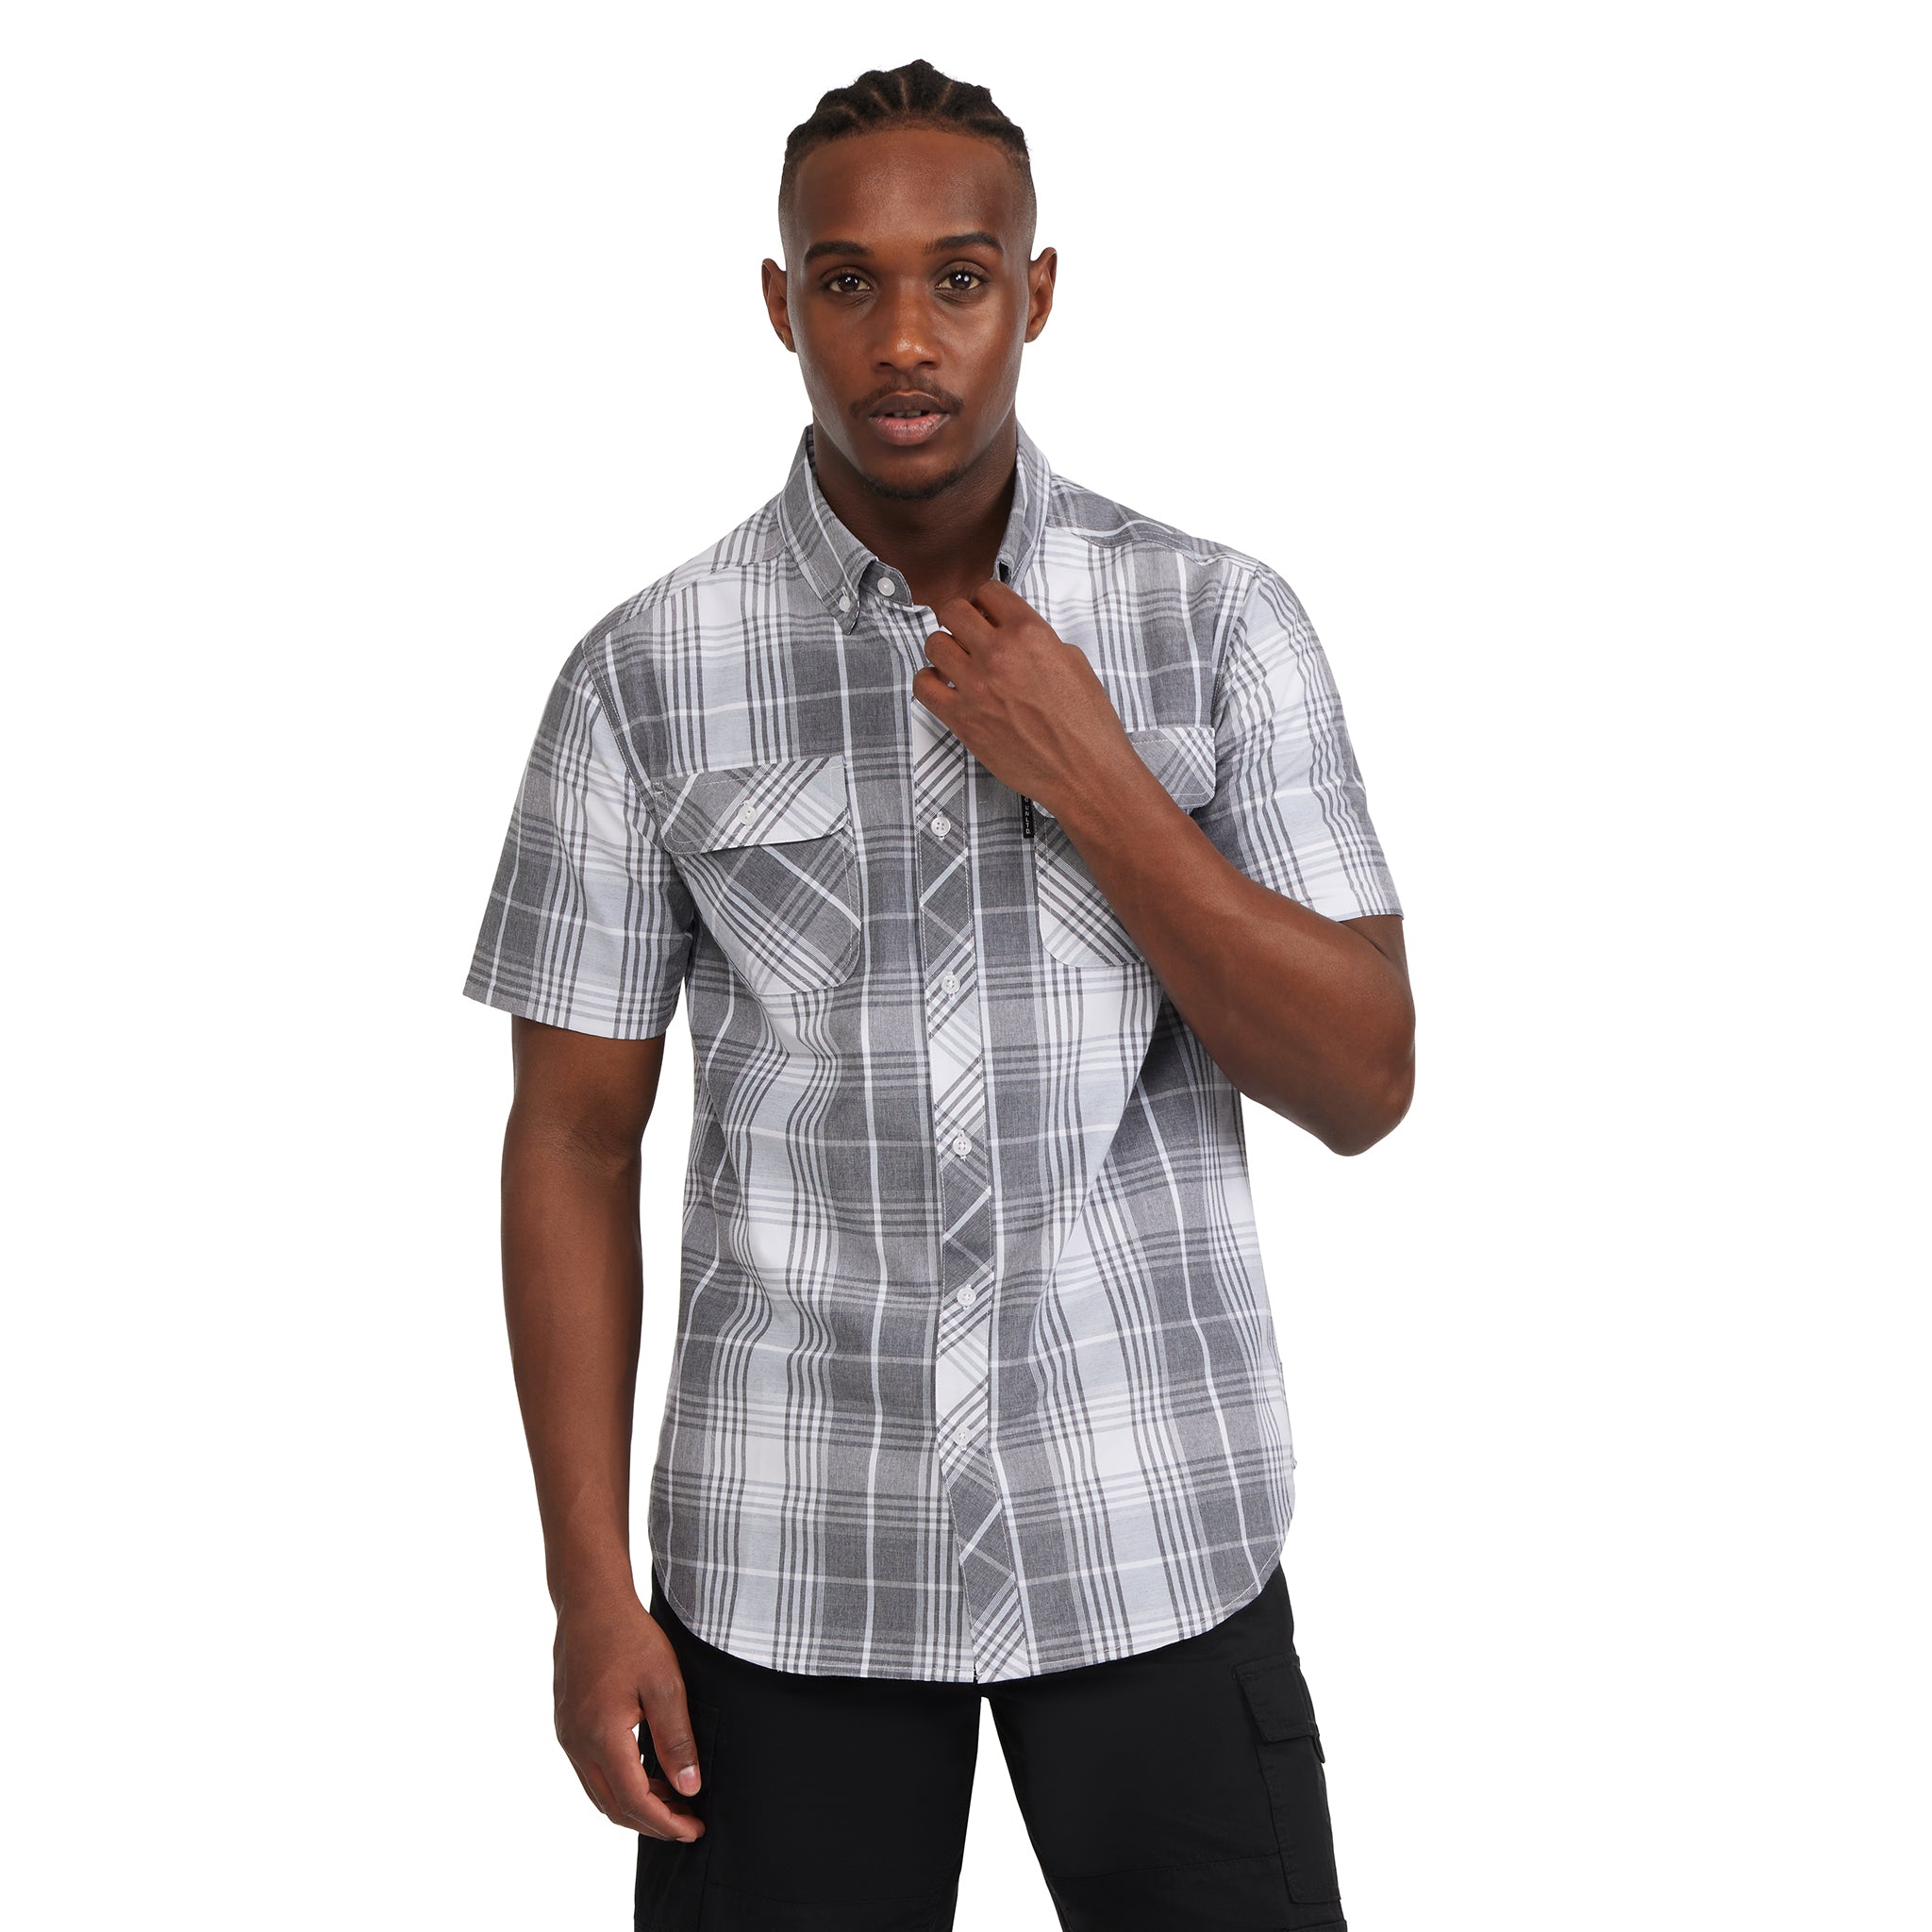 Marled Solid Work Short Sleeve Woven Shirt